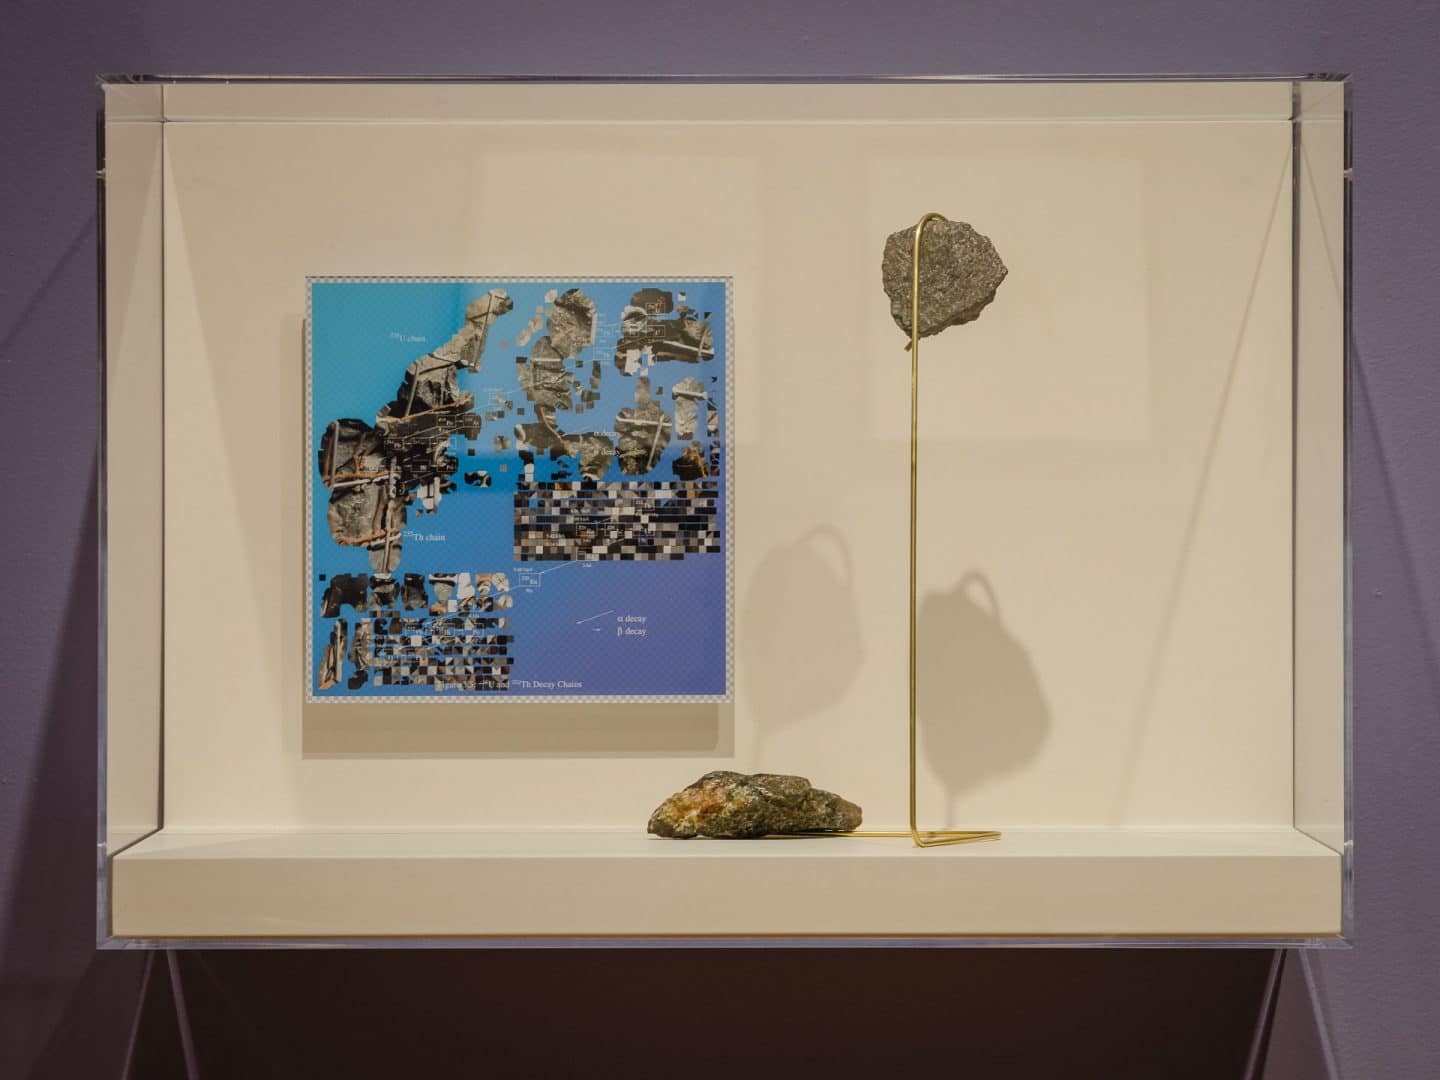 Jol Thoms, Isomorphis (redactor) and untitled sculpture, 2020, acrylic-mounted c-print and brass and rock sculpture with rock sourced from Dynamic Earth Sudbury. Collection of the artist